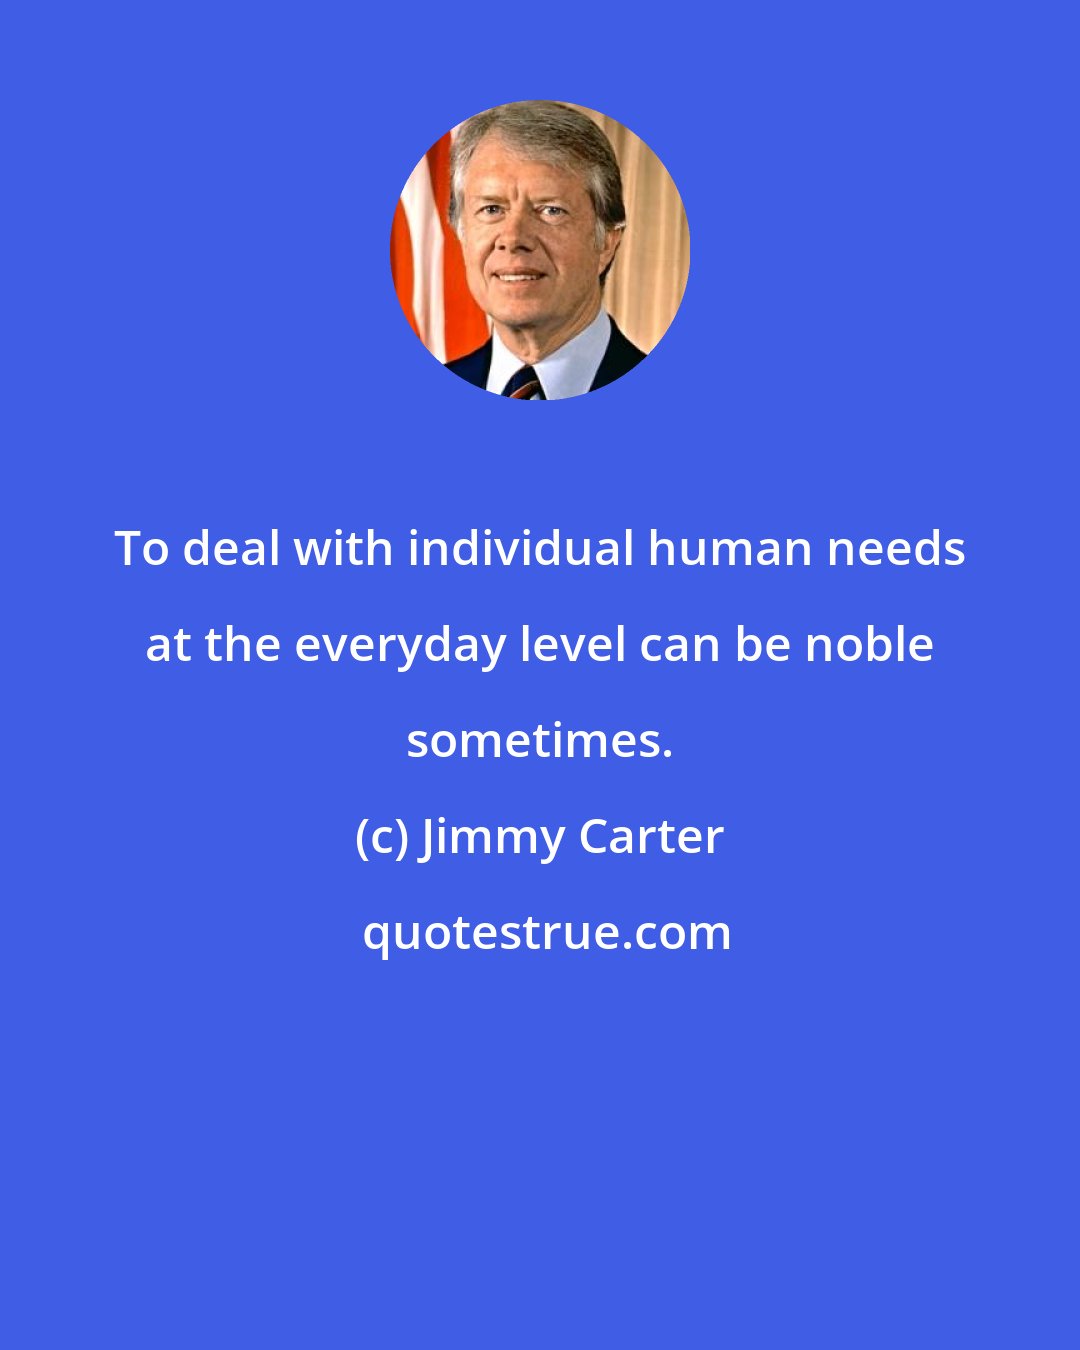 Jimmy Carter: To deal with individual human needs at the everyday level can be noble sometimes.